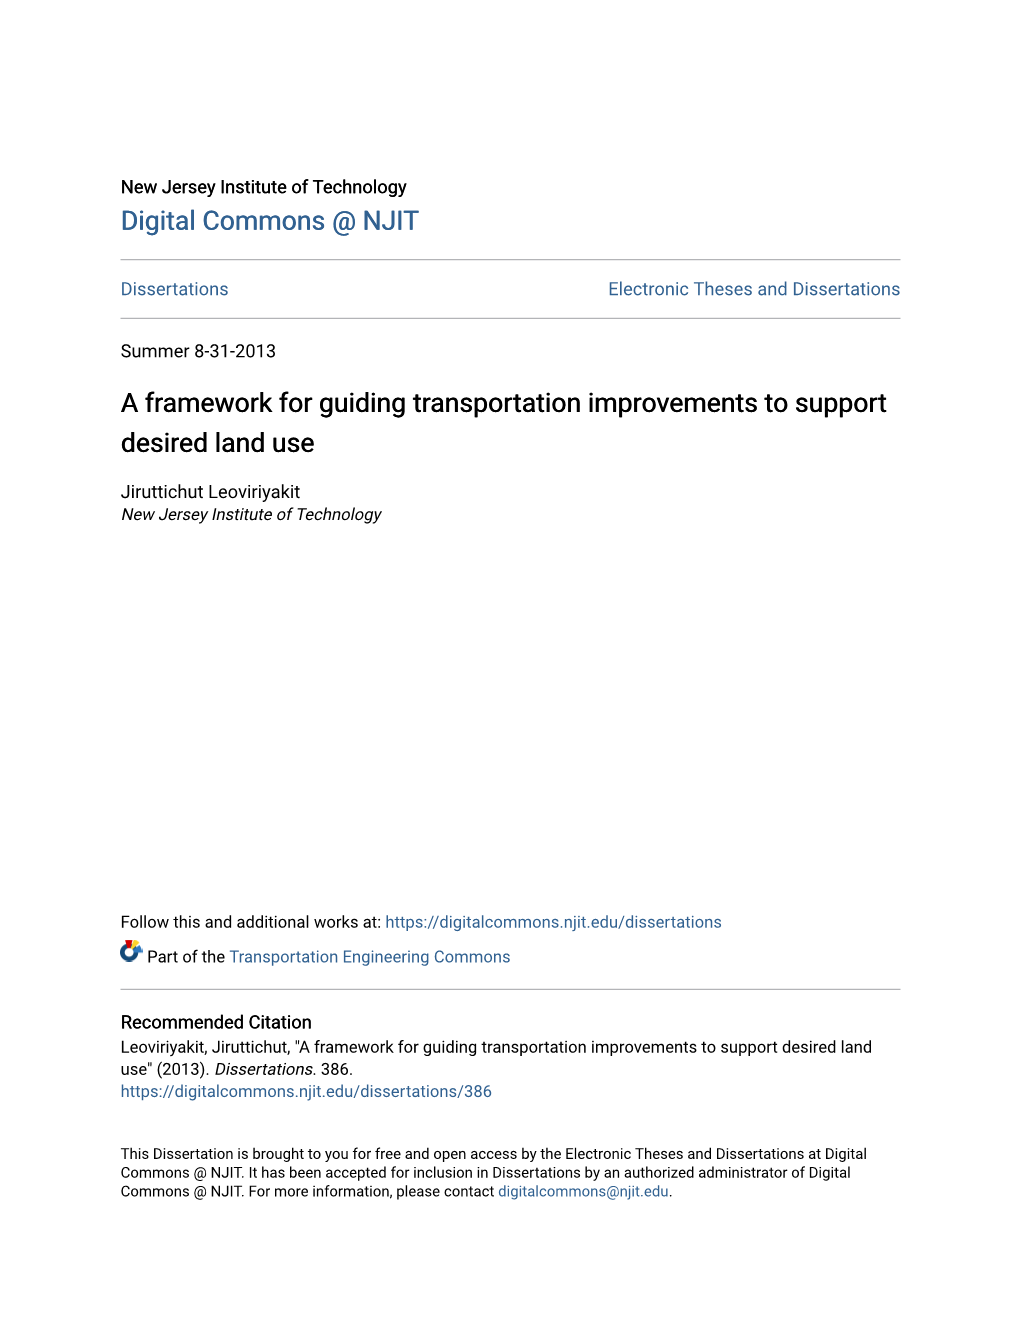 A Framework for Guiding Transportation Improvements to Support Desired Land Use